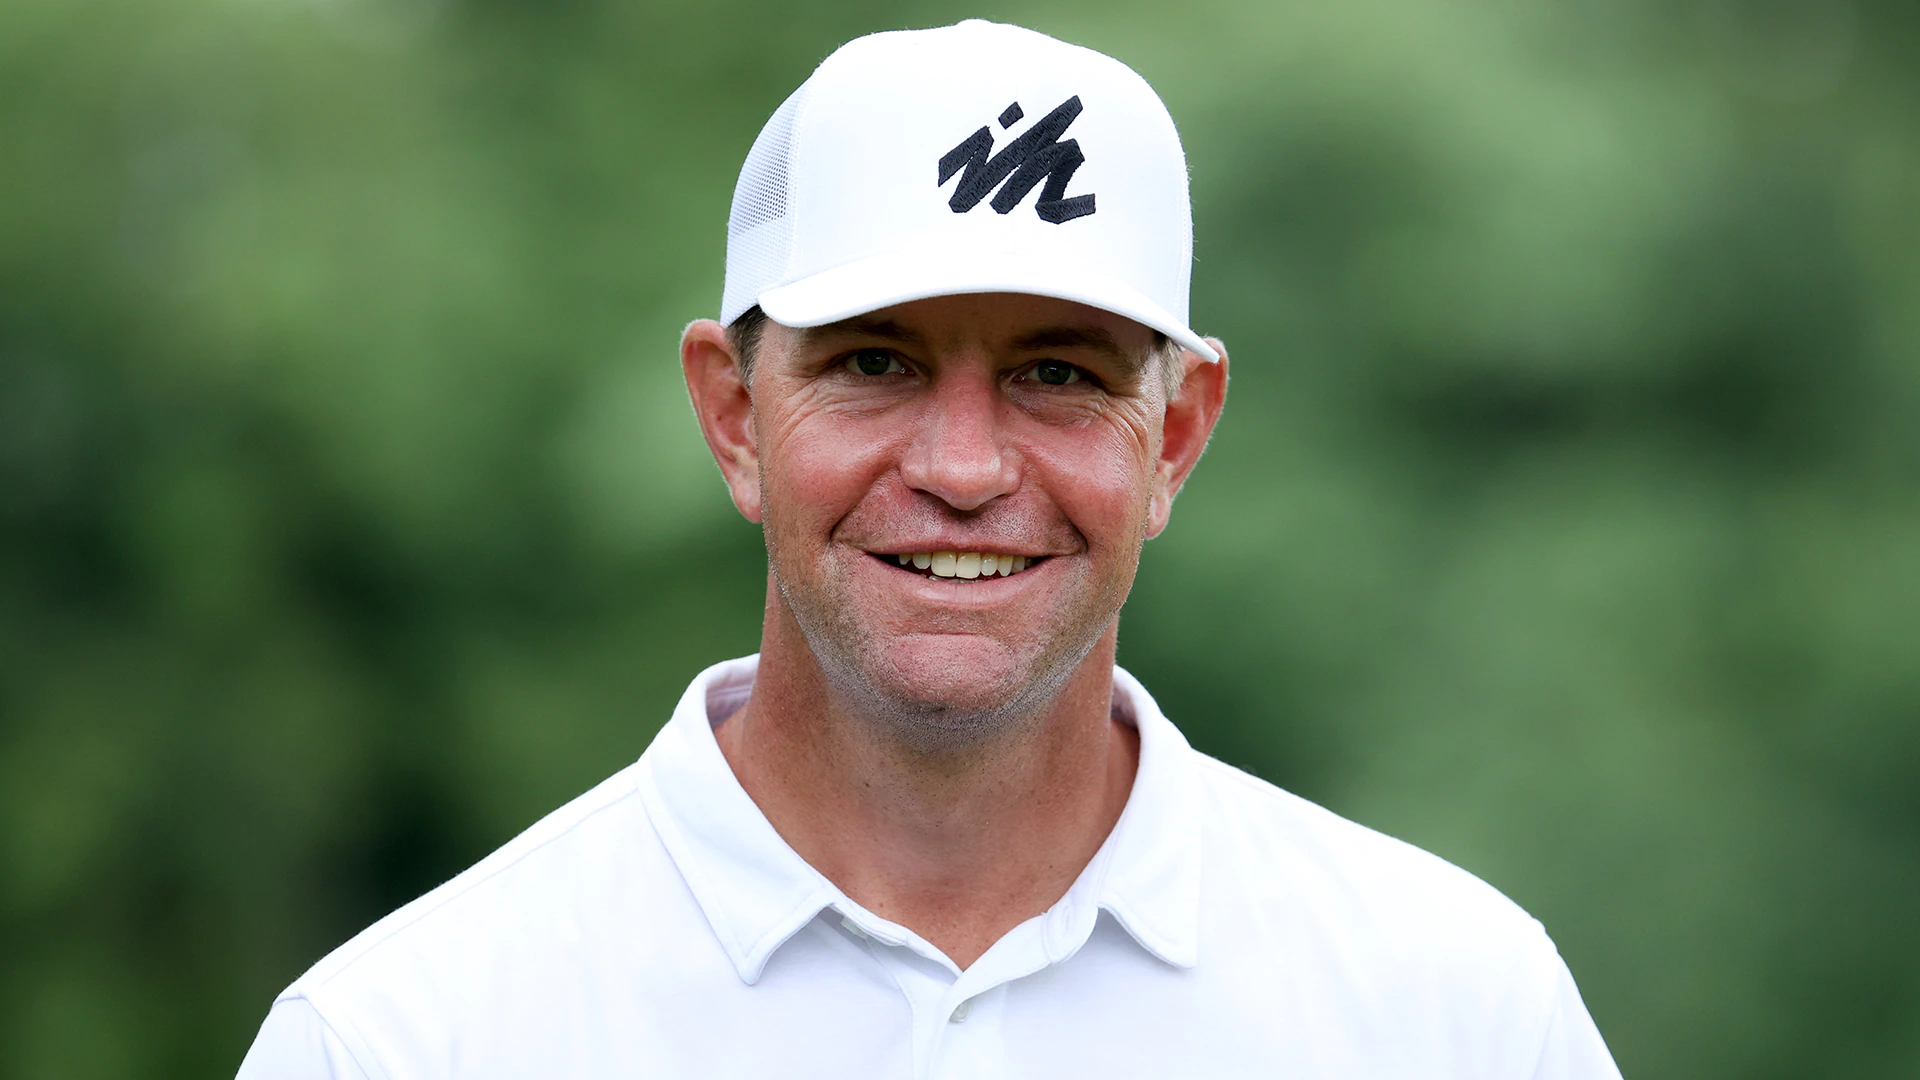 Lucas Glover on drought-ending win: ‘I never doubted’